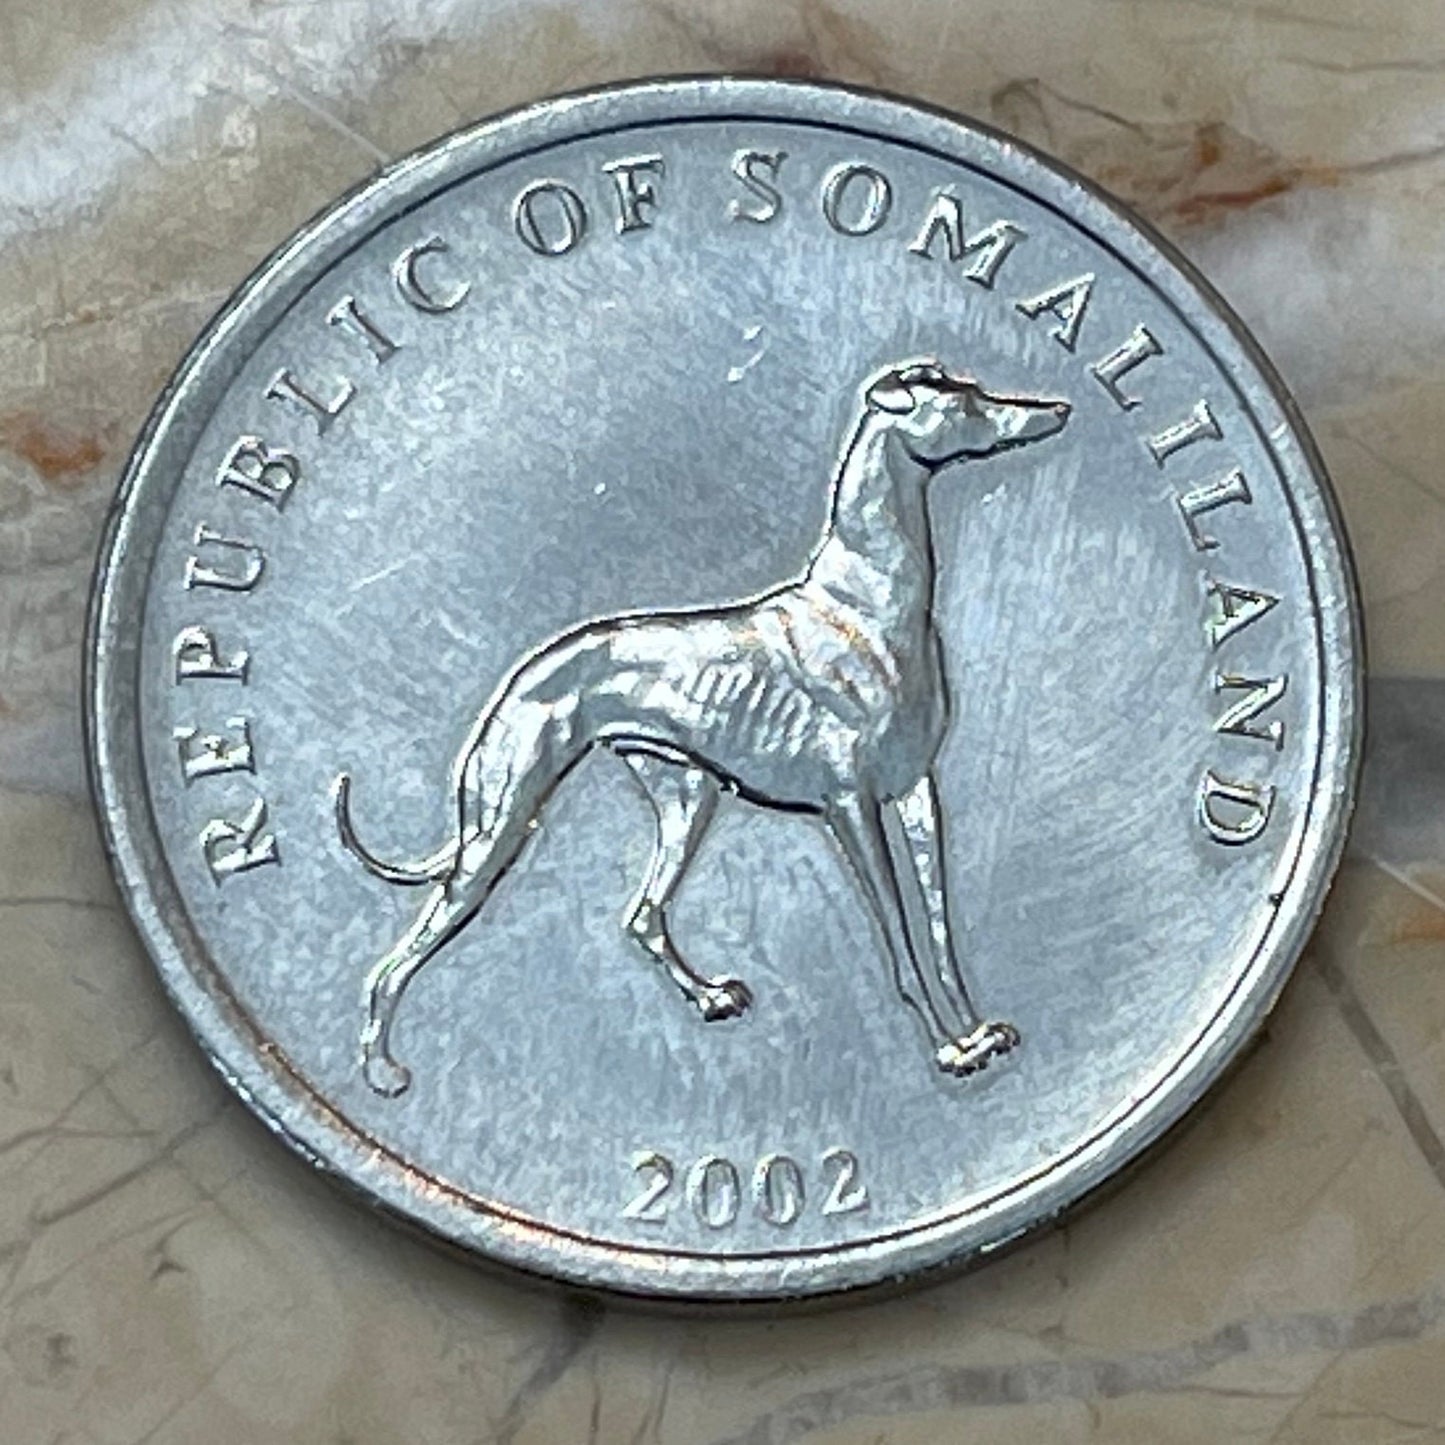 Greyhound Somaliland 20 Shillings Authentic Coin Money for Jewelry and Craft Making (Italian Greyhound)